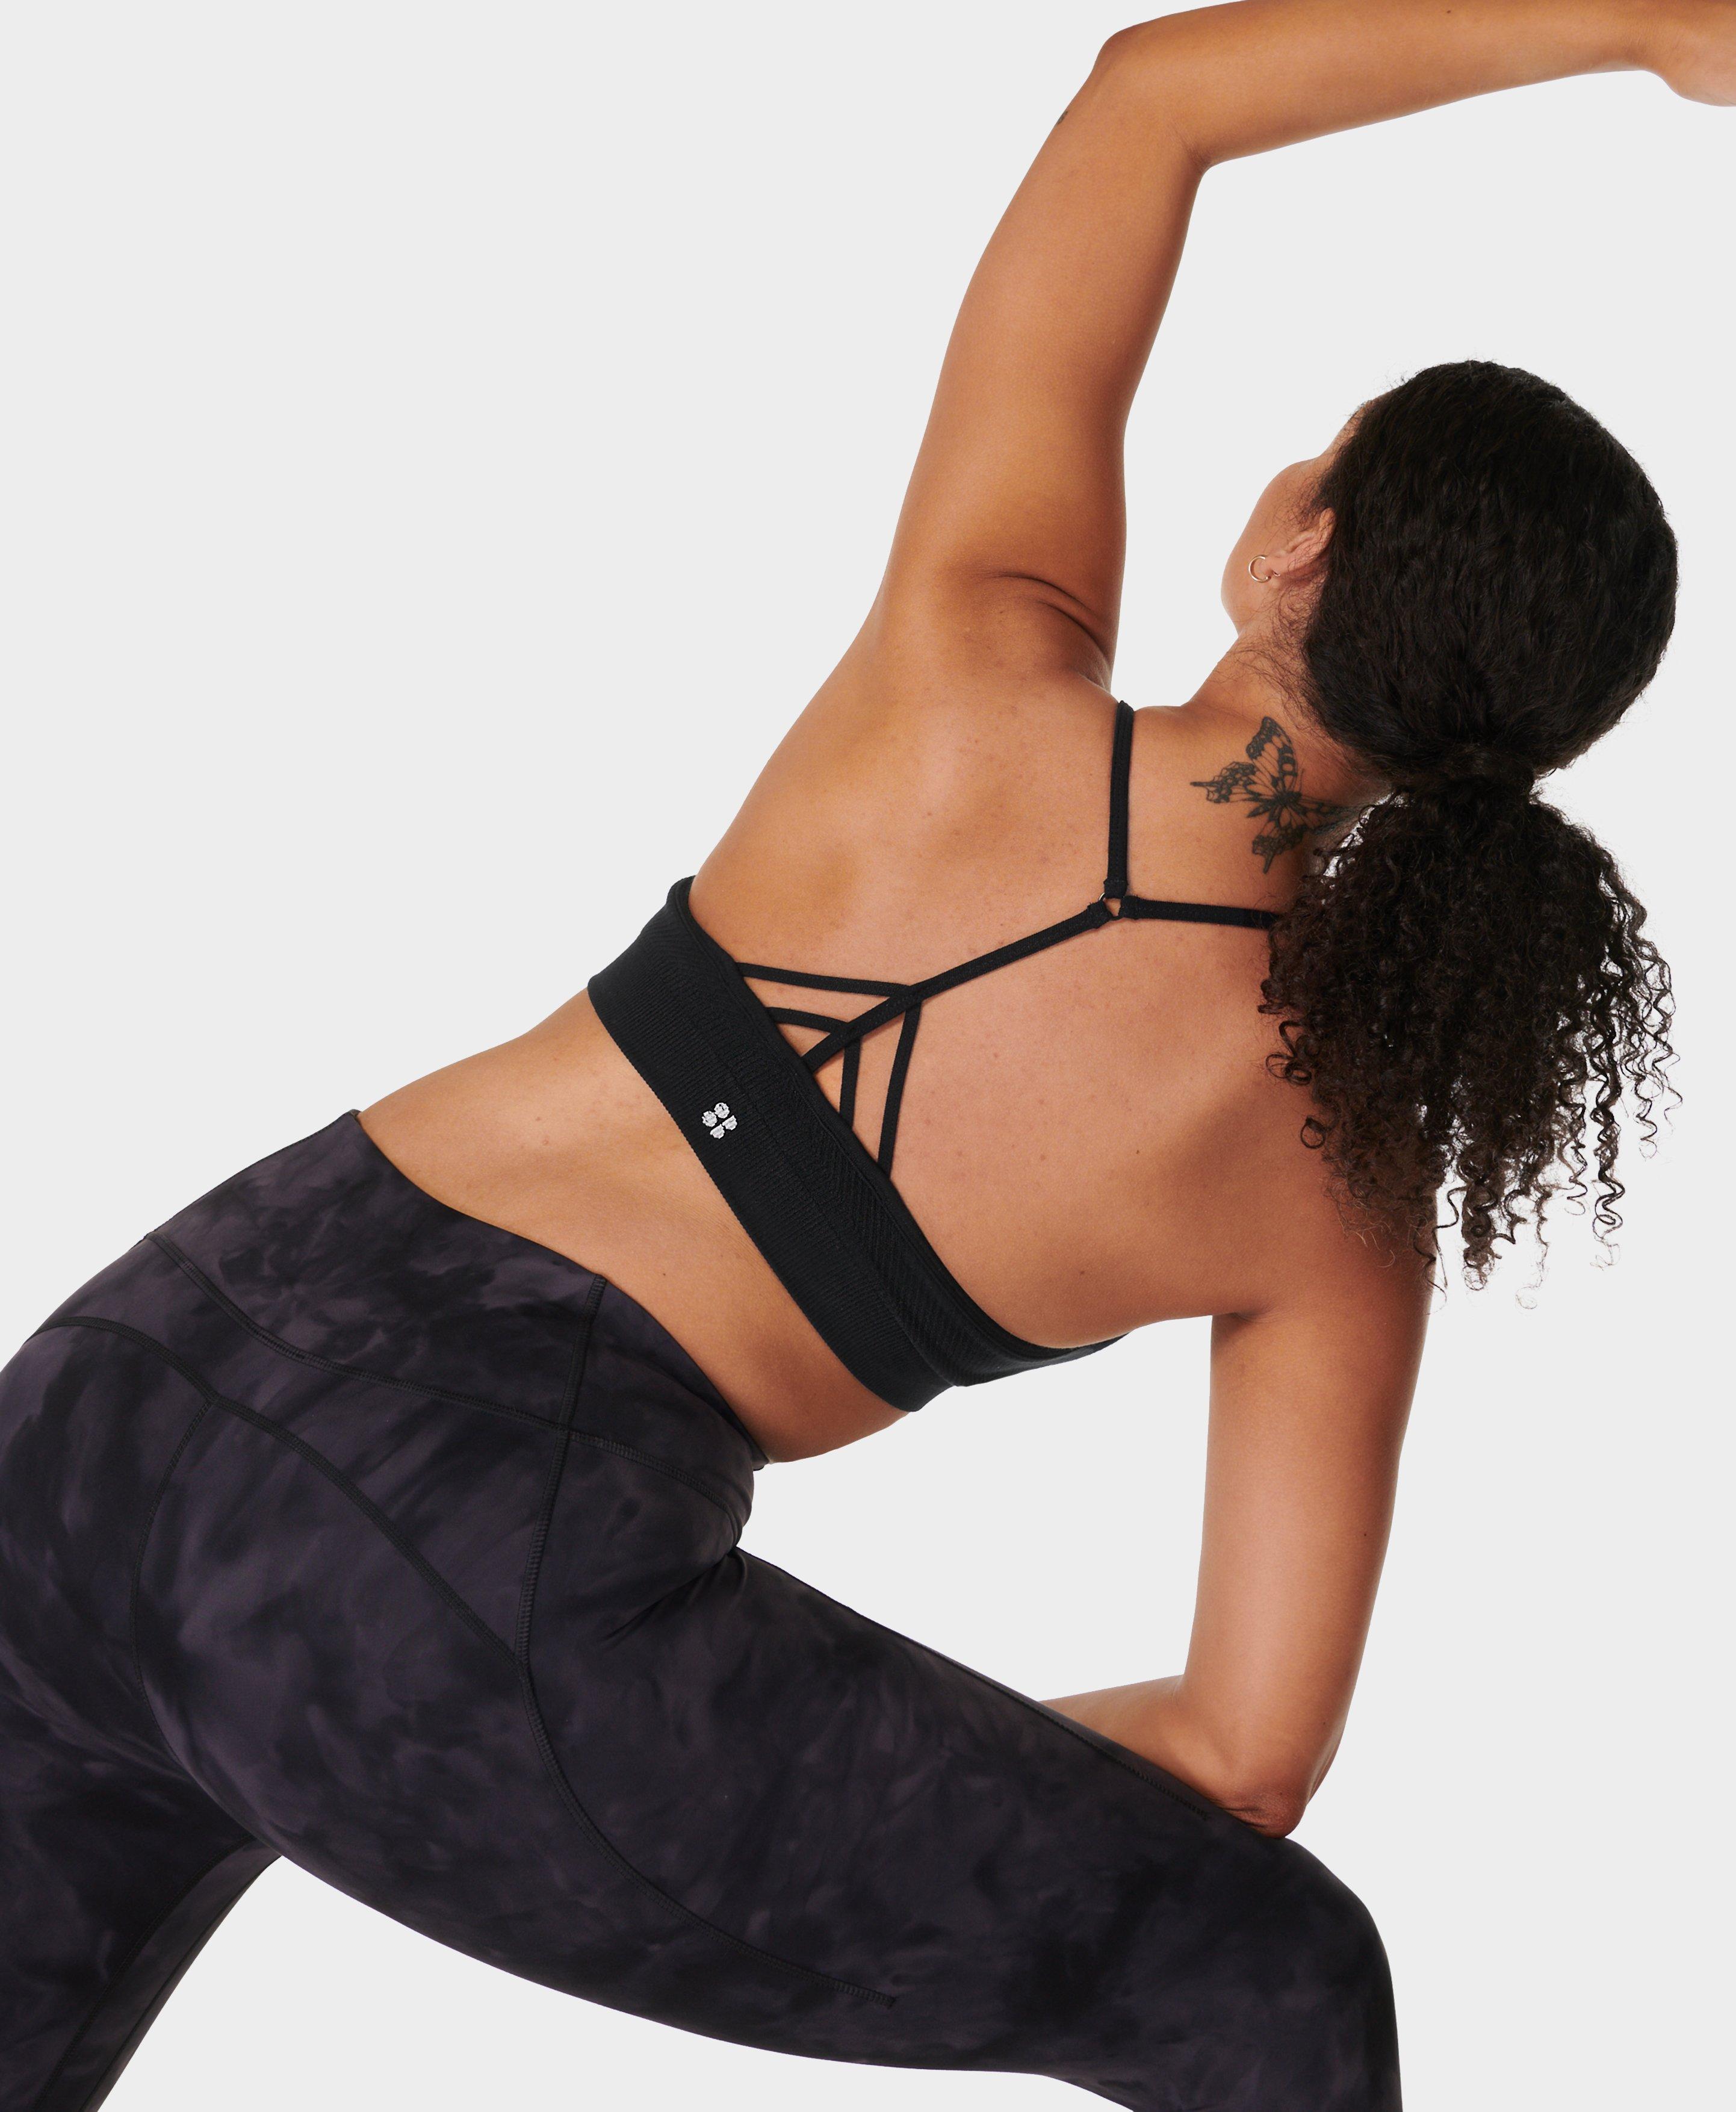 On - Sprint, squat, bounce and sweat in the Performance Bra and the Active  Bra. Two functional, supportive, comfortable sports bras. So whether you're  chasing the miles or mastering your headstands –